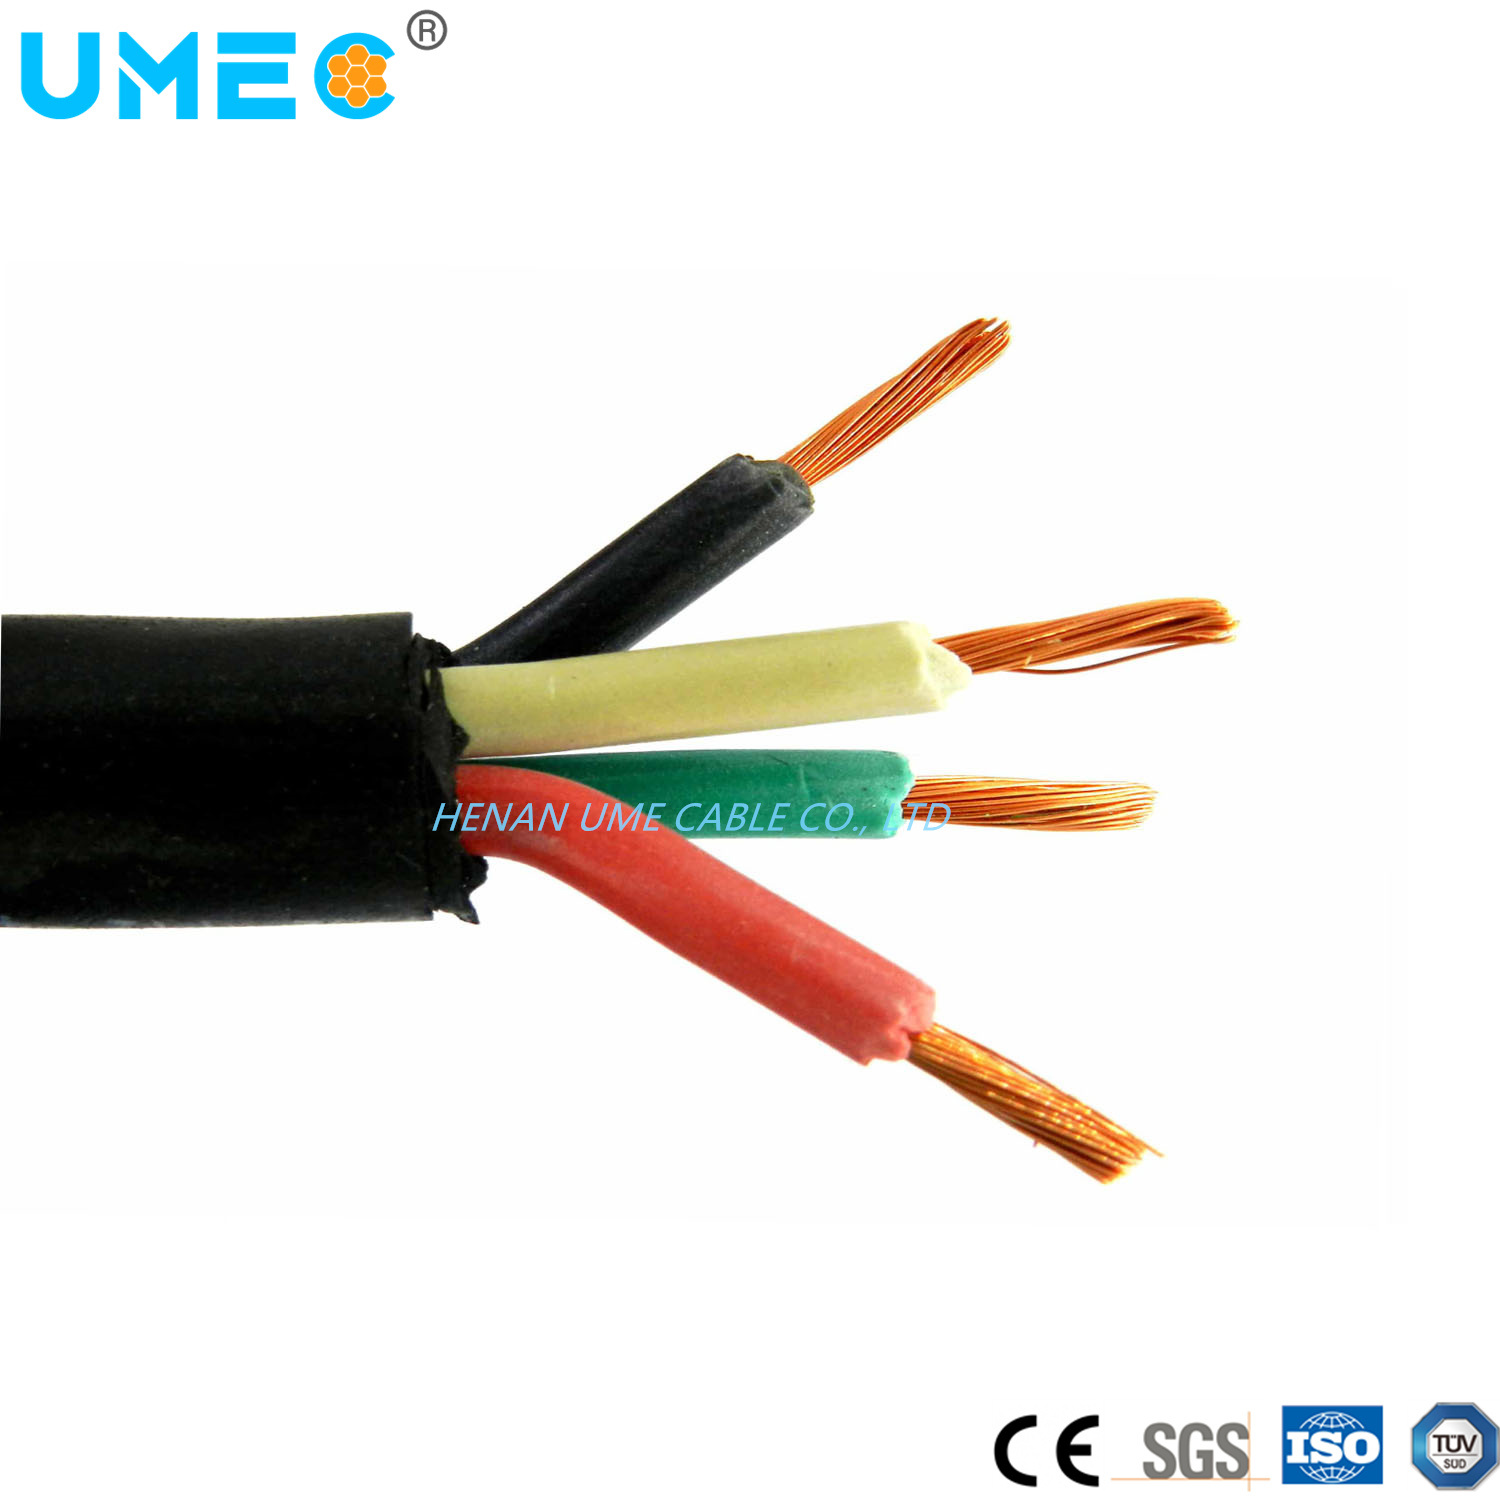 Yellow and Black Jacket So/Sow/Sjoow 4gx11AWG Soow Cable Cable Abrasion Proof Sjoow Sejoow Cable